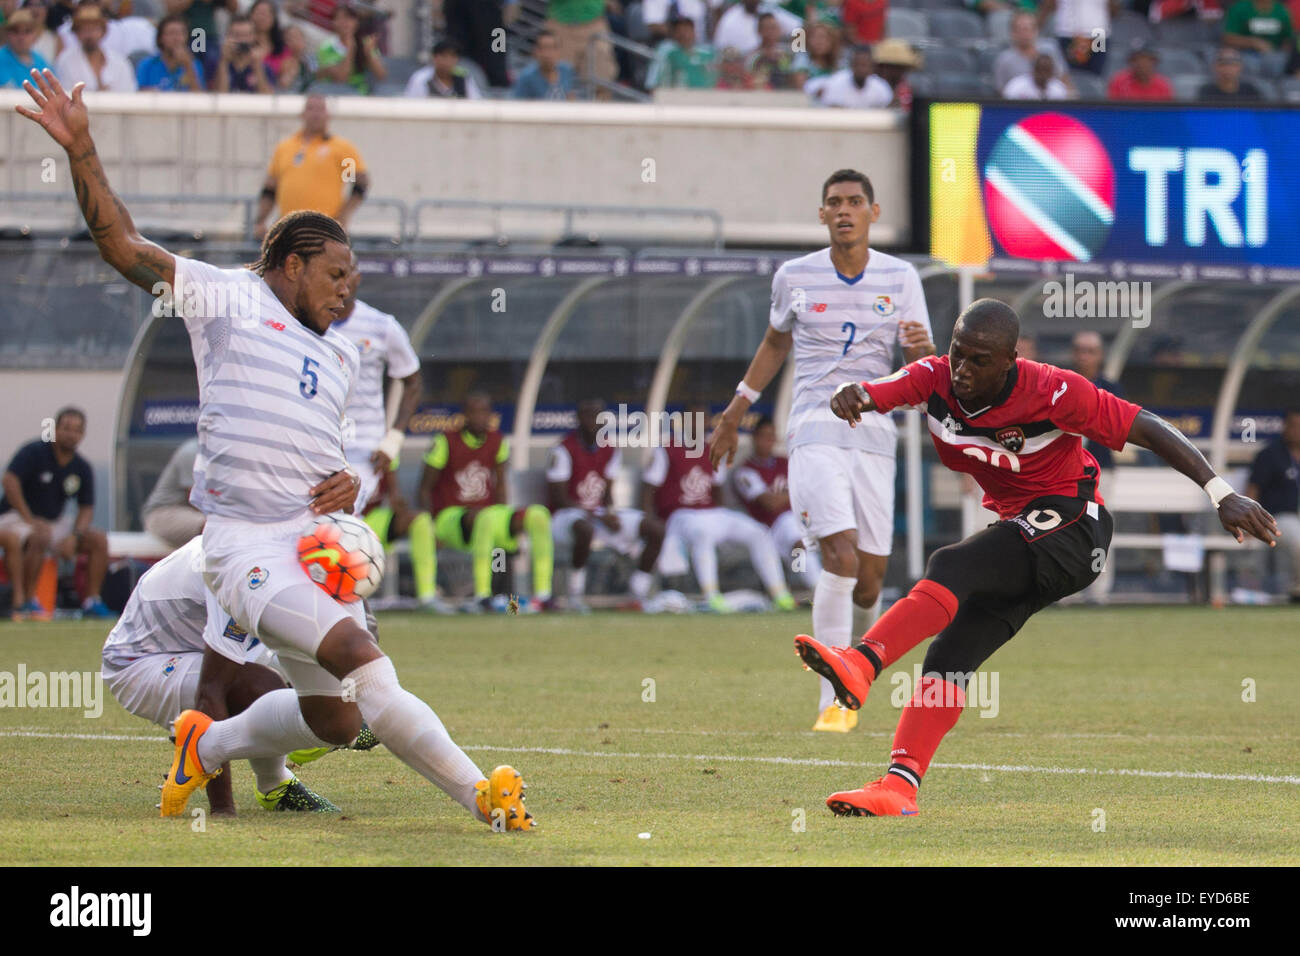 The Match By Shootout. 19th July, 2015. Panama defense Roman Torres (5) blocks the shot by Trinidad & Tobago midfielder Keron Cummings (20) during the CONCACAF Gold Cup 2015 Quarterfinal match between the Trinidad & Tobago and Panama at MetLife Stadium in East Rutherford, New Jersey. Panama won the match by shootout. (Christopher Szagola/Cal Sport Media) © csm/Alamy Live News Stock Photo